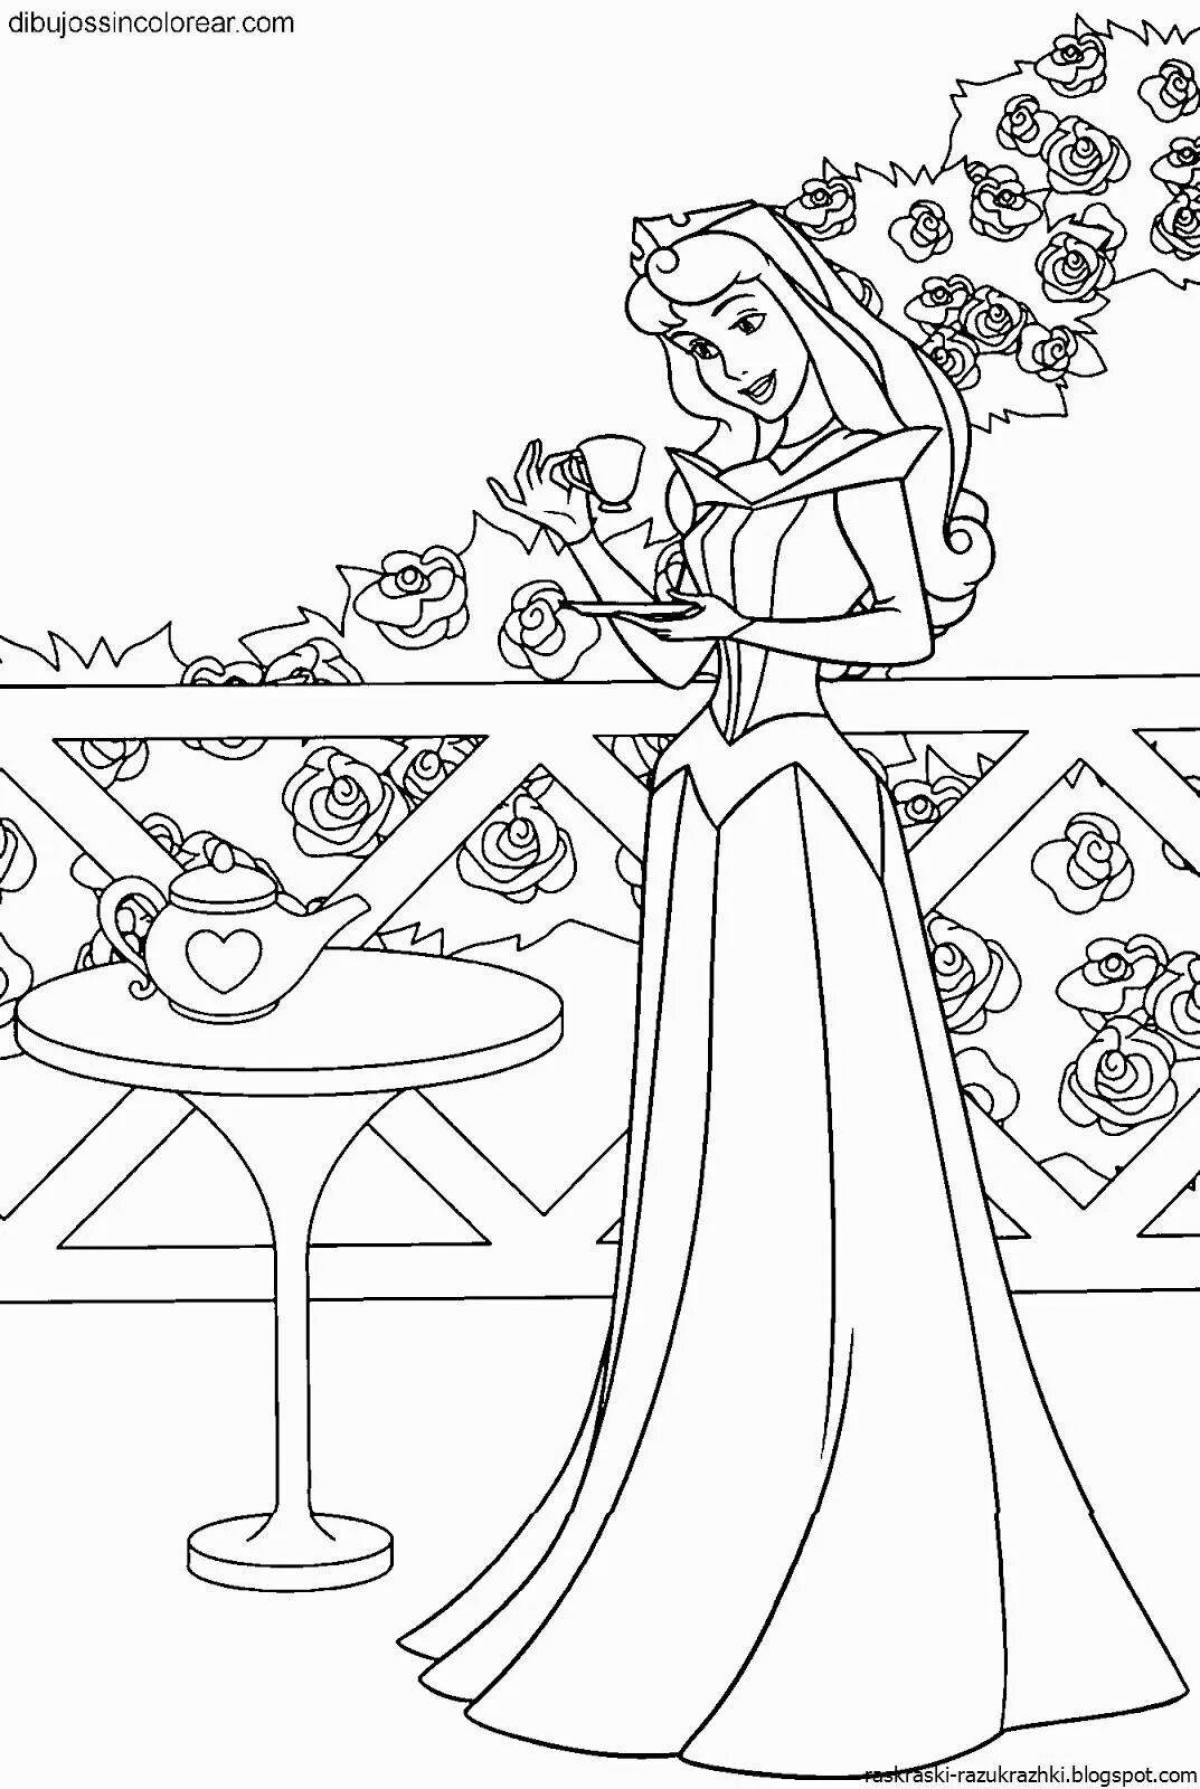 Playful sleeping beauty coloring book for kids